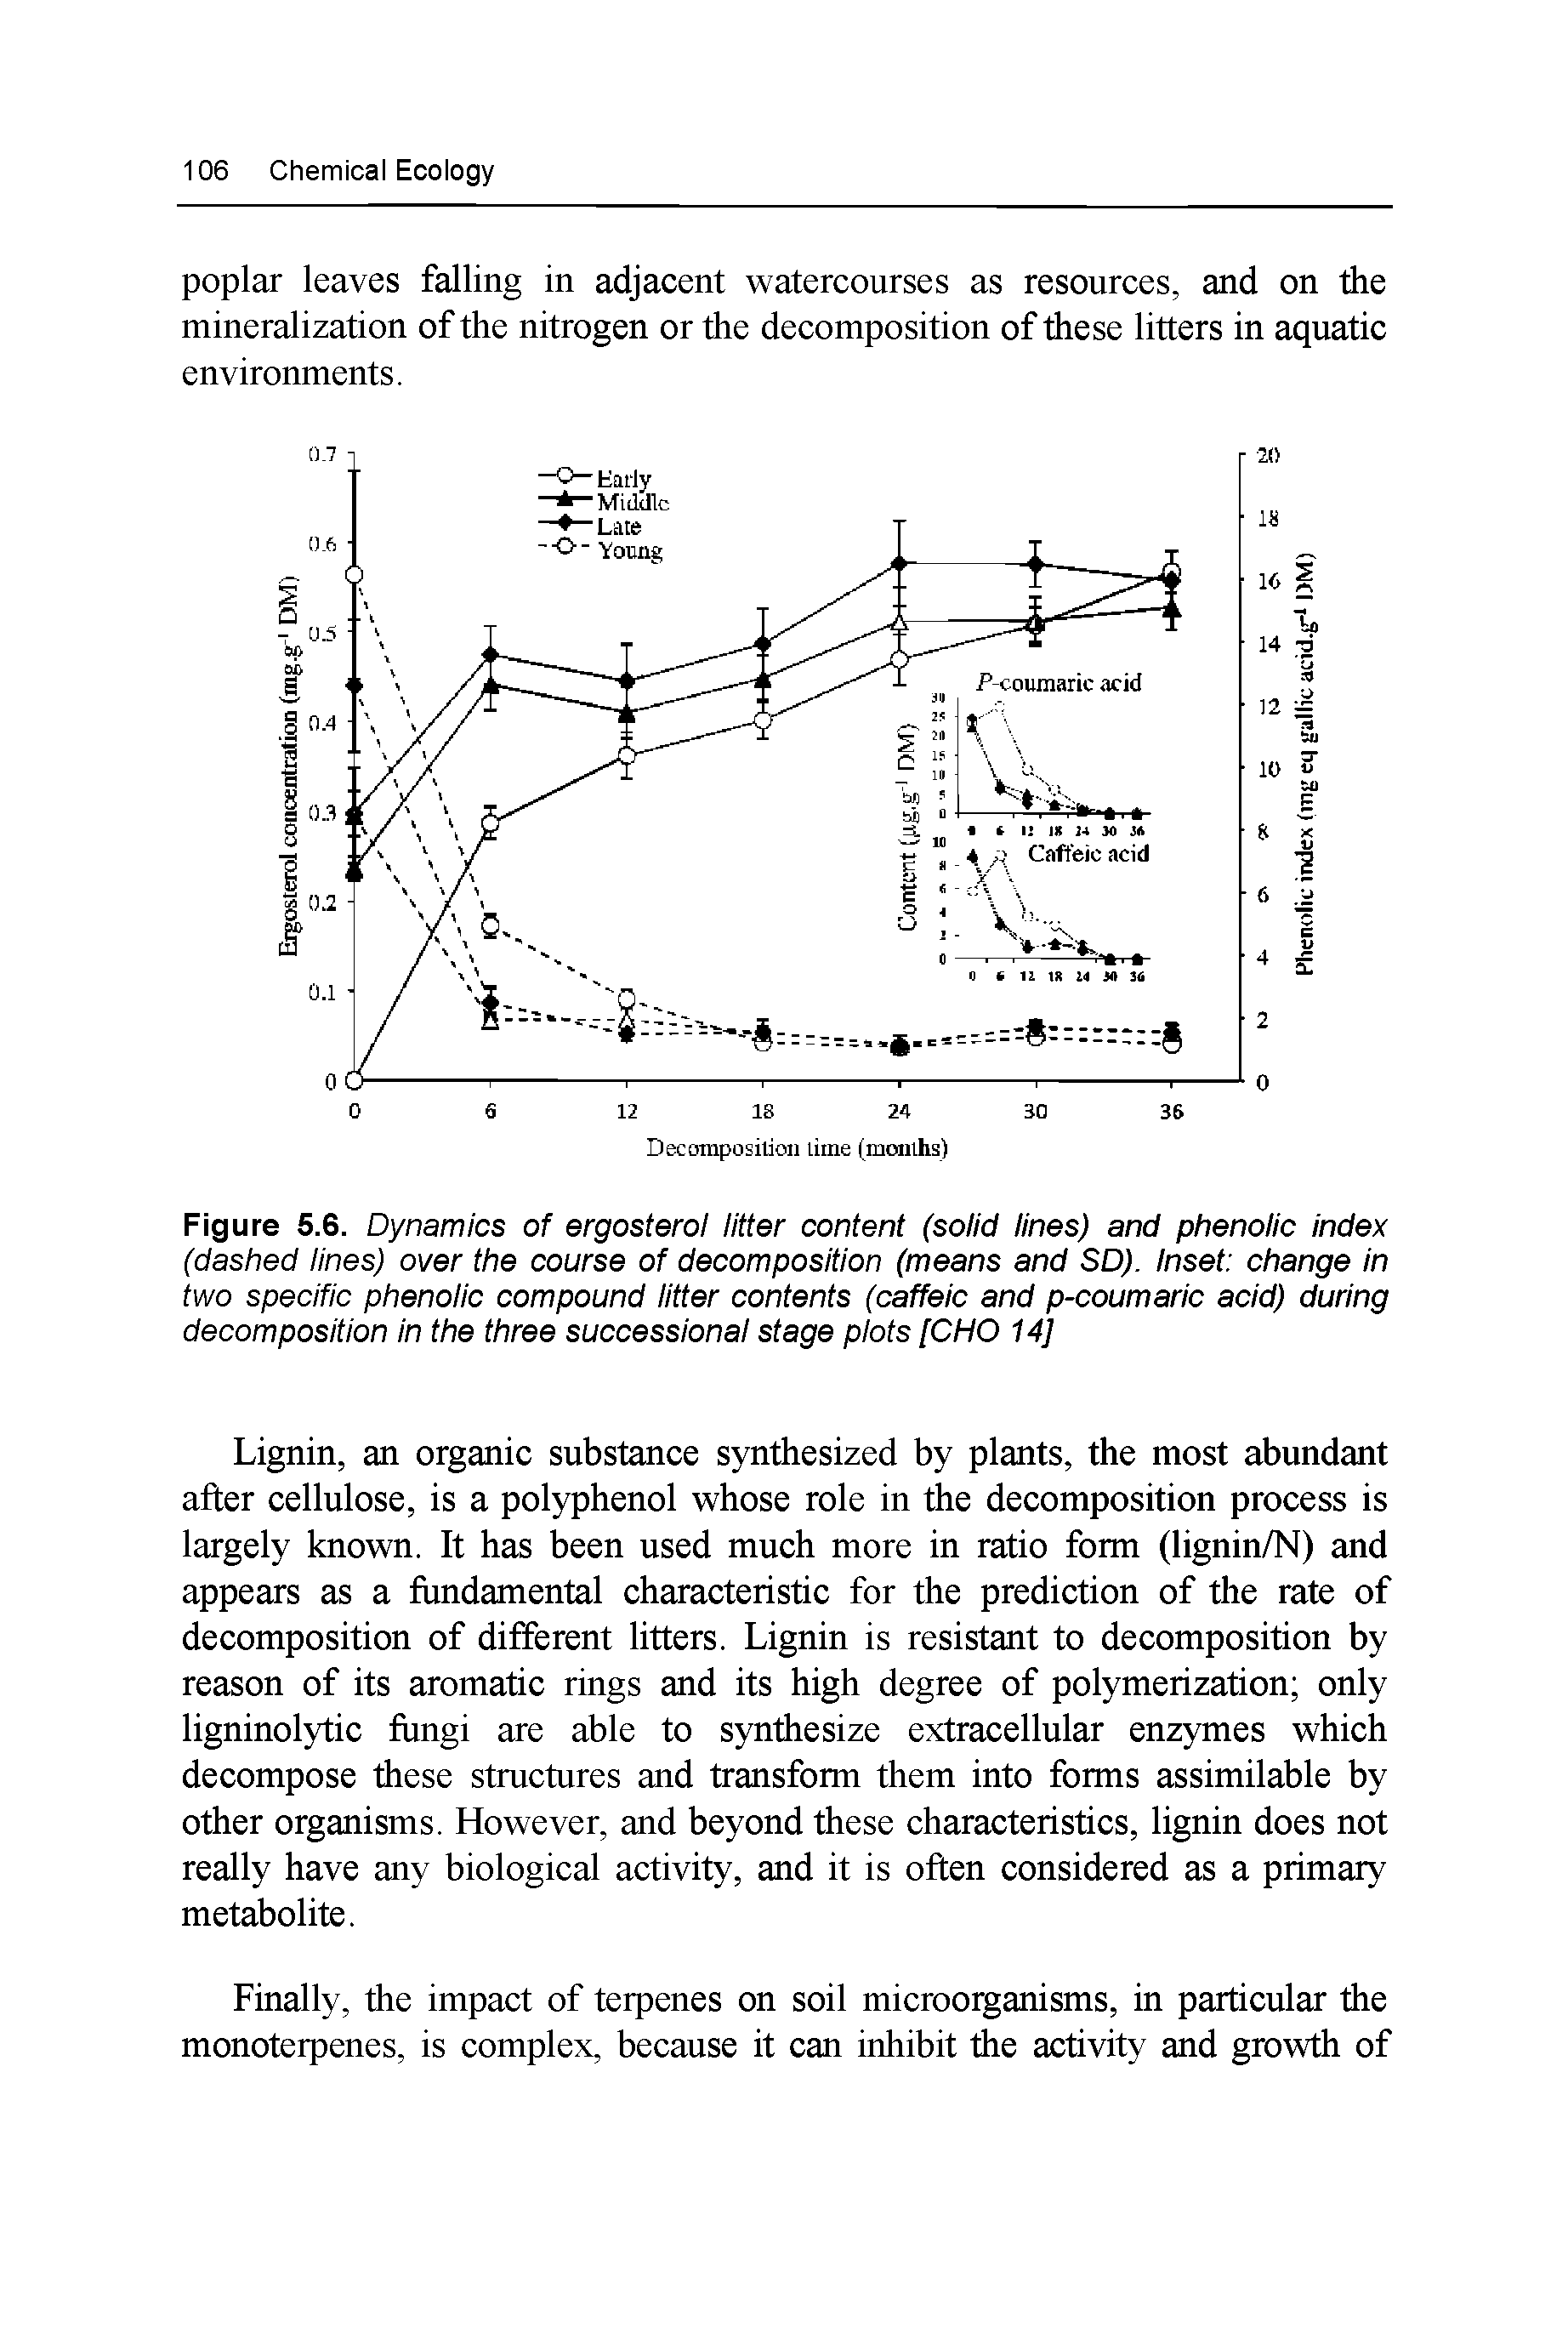 Figure 5.6. Dynamics of ergosterol litter content (solid lines) and phenolic index (dashed lines) over the course of decomposition (means and SD). Inset change in two specific phenolic compound litter contents (caffeic and p-coumaric acid) during decomposition In the three successlonal stage plots [CHO 14]...